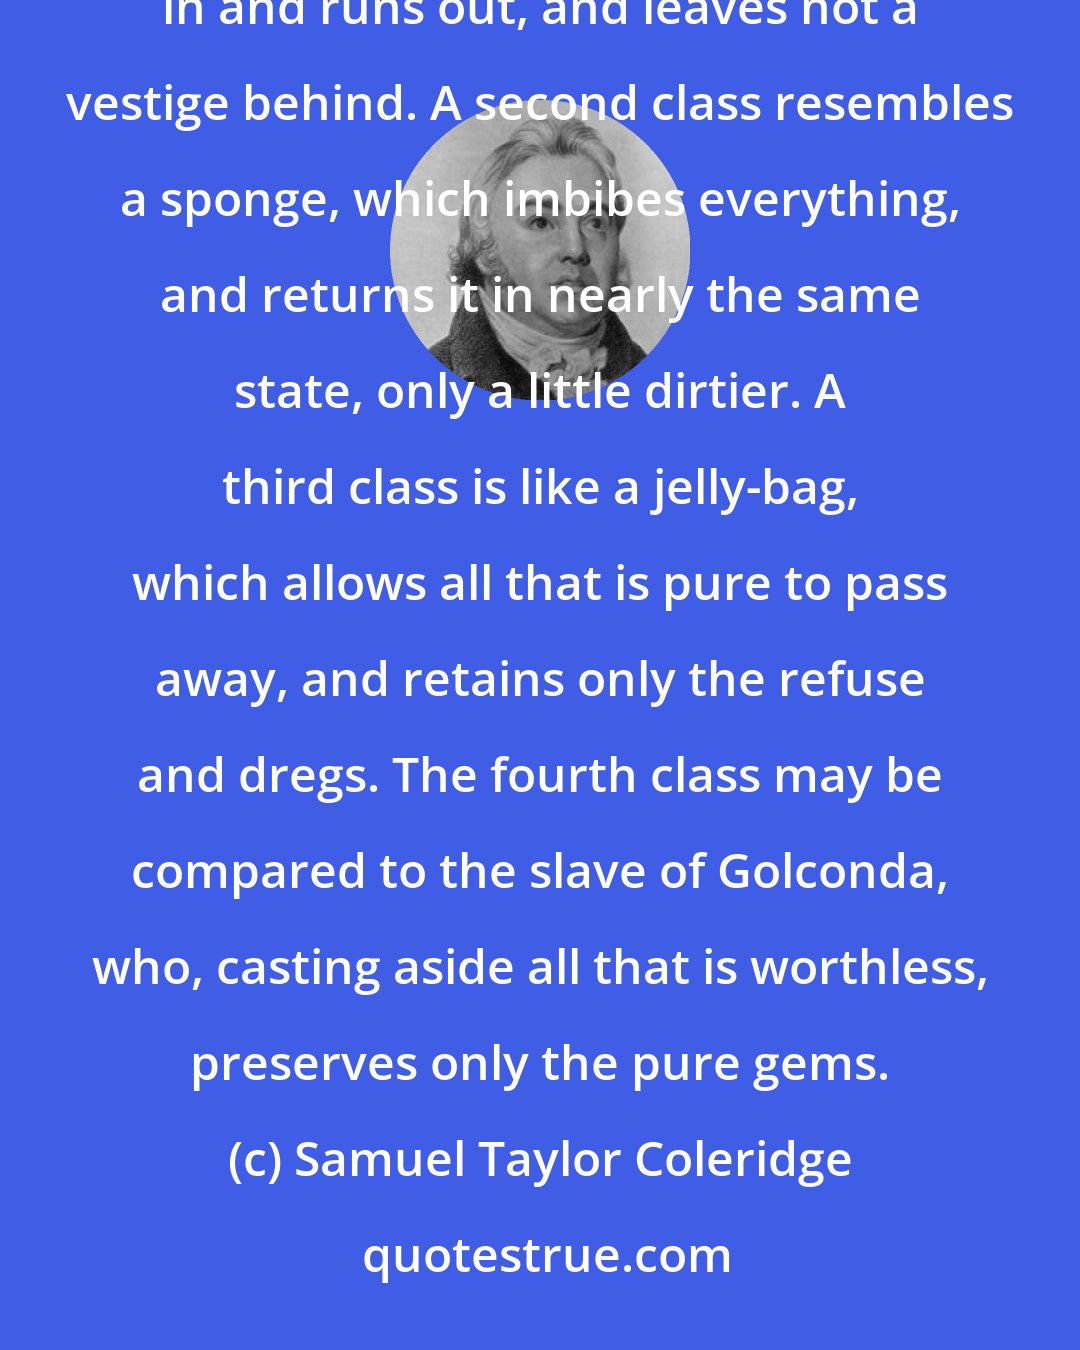 Samuel Taylor Coleridge: The first class of readers may be compared to an hour-glass, their reading being as the sand; it runs in and runs out, and leaves not a vestige behind. A second class resembles a sponge, which imbibes everything, and returns it in nearly the same state, only a little dirtier. A third class is like a jelly-bag, which allows all that is pure to pass away, and retains only the refuse and dregs. The fourth class may be compared to the slave of Golconda, who, casting aside all that is worthless, preserves only the pure gems.